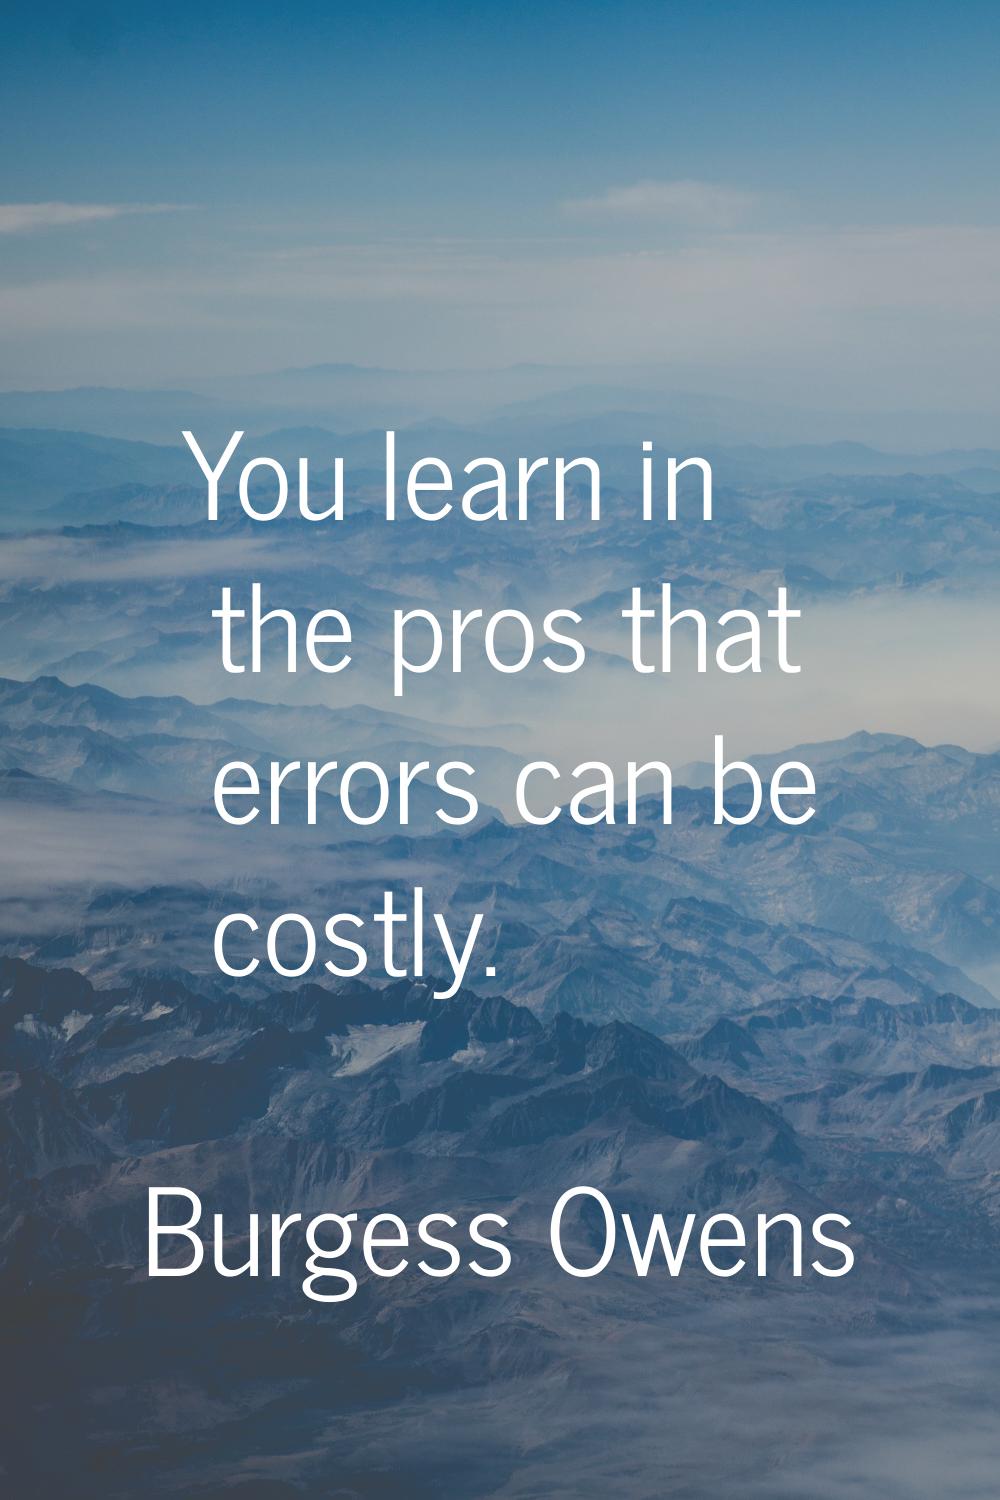 You learn in the pros that errors can be costly.